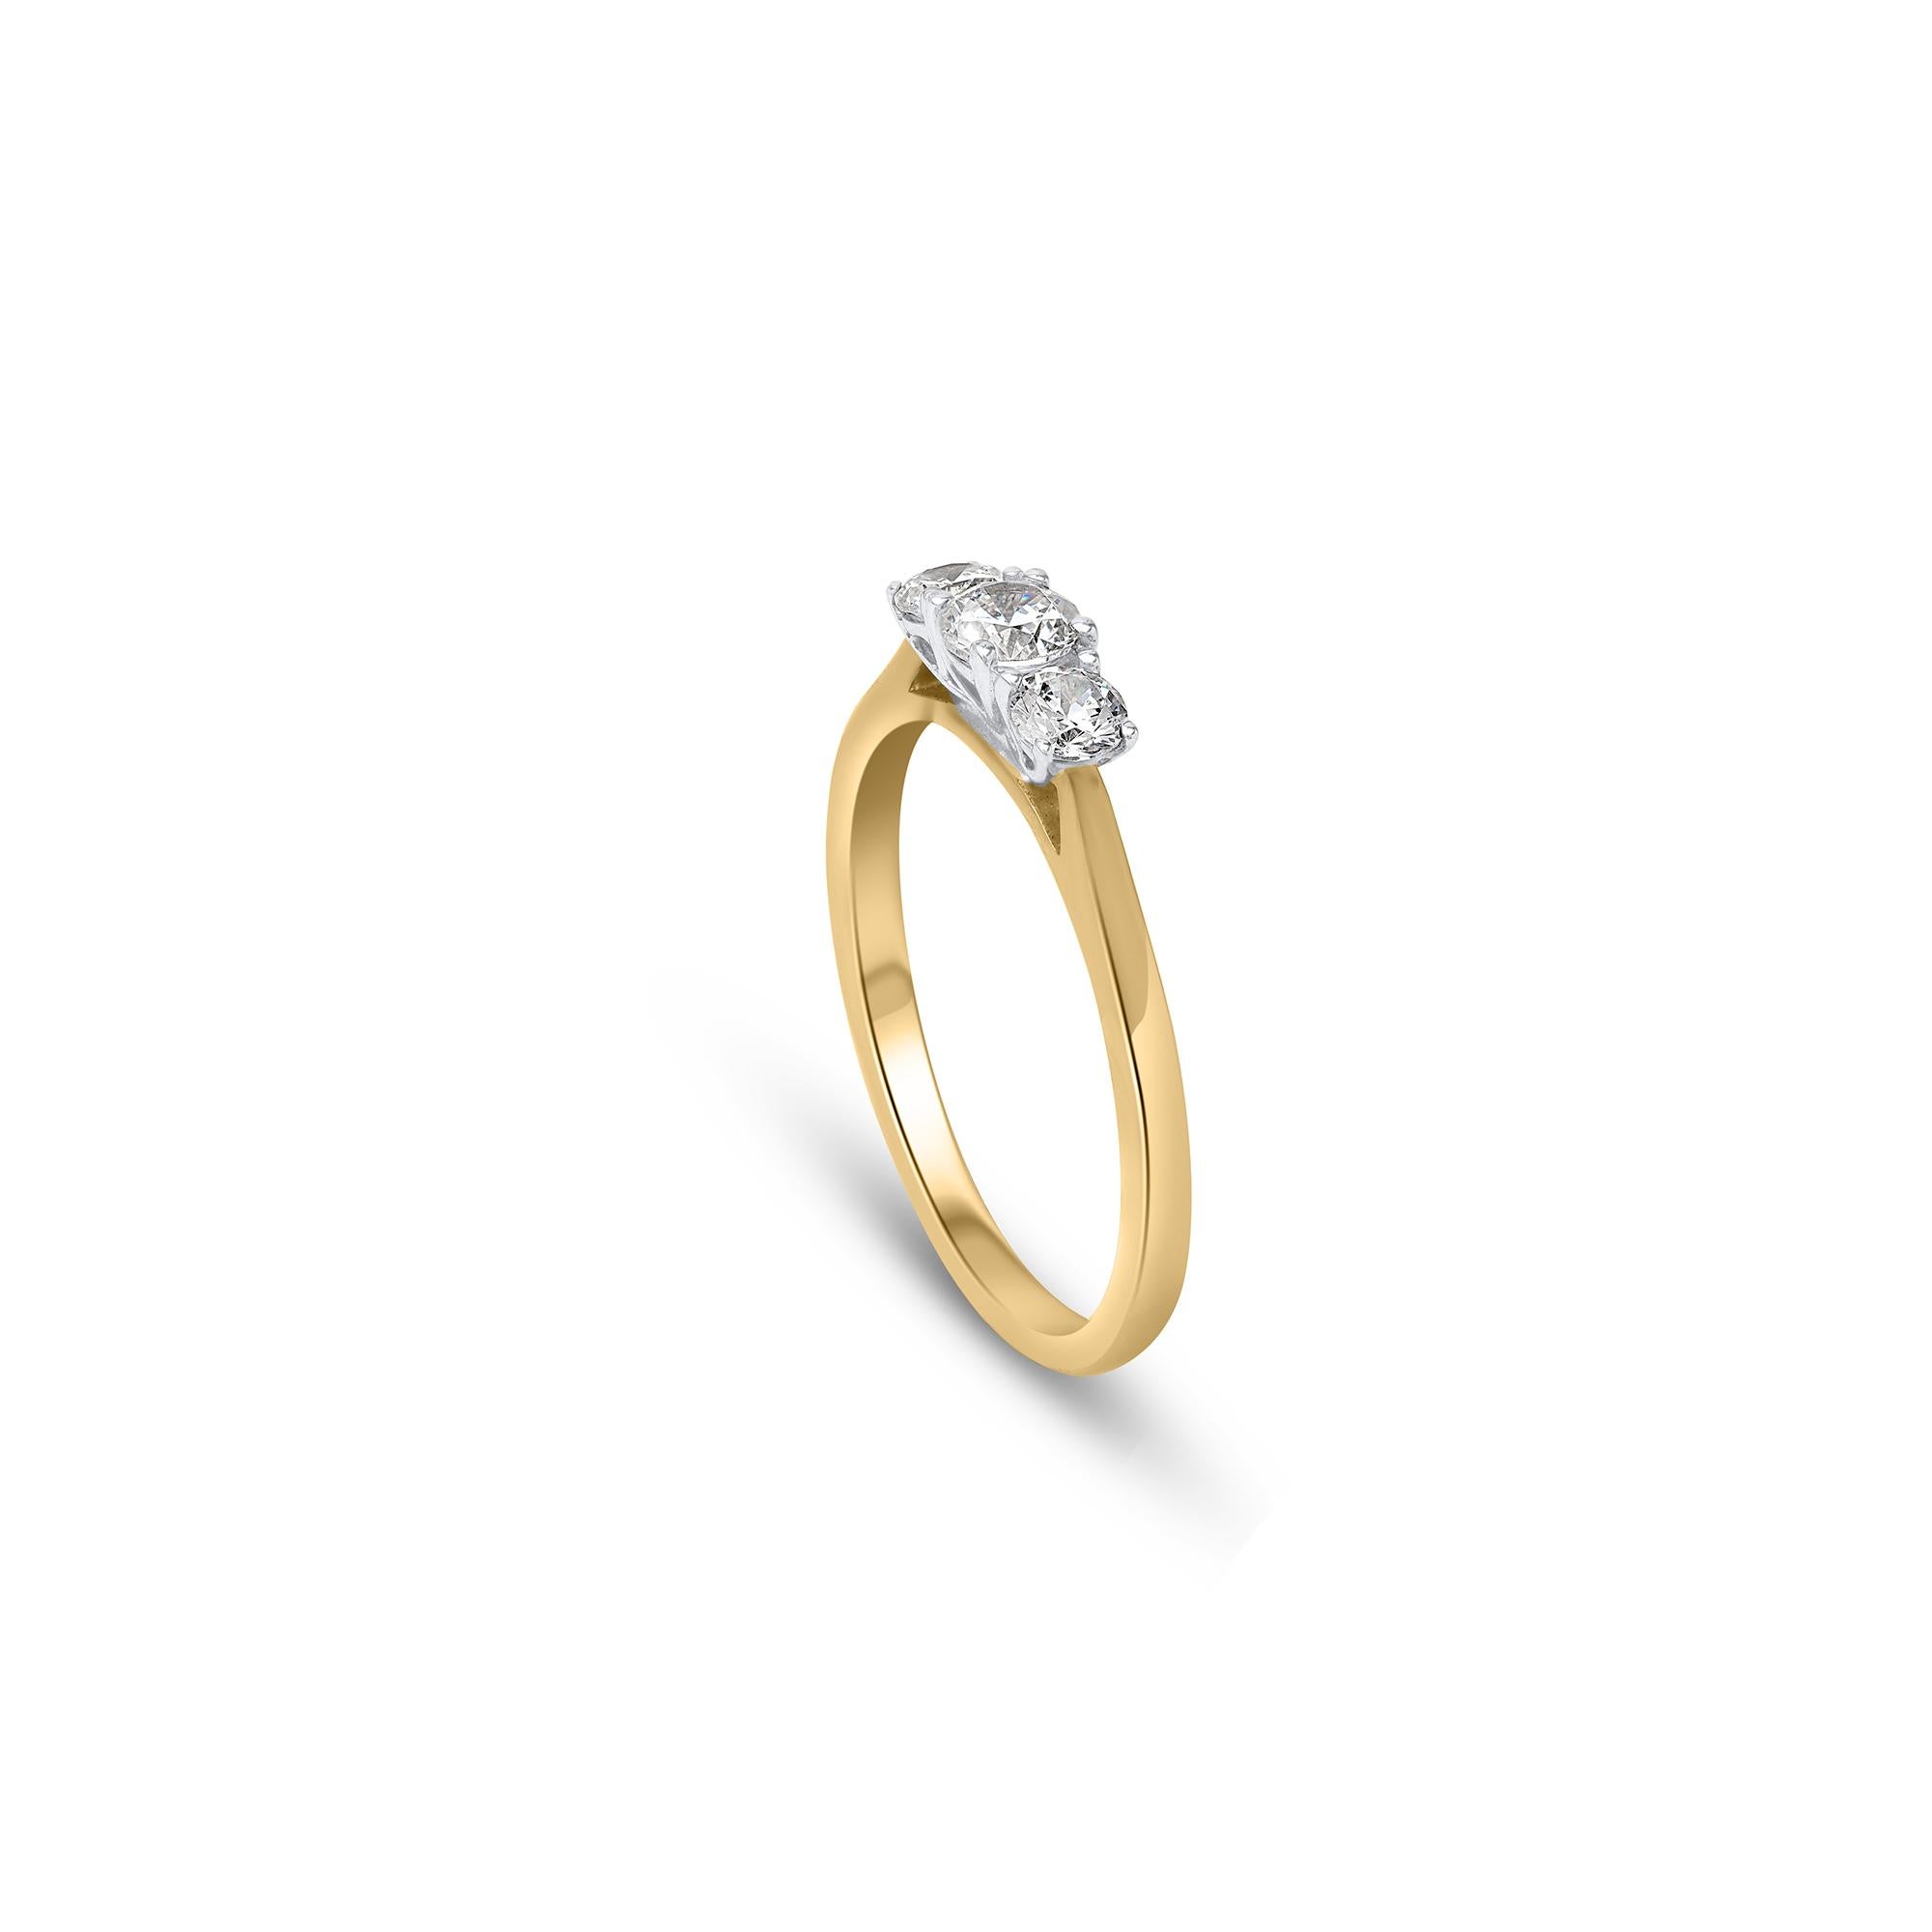 A sleek and timeless 3 stone engagement ring. Crafted by our in-house experts in 18 kt yellow gold and beautifully studded with three brilliant natural diamond set in prong setting.  Diamonds are graded H-I Color, I1 Clarity. 

Metal color and ring